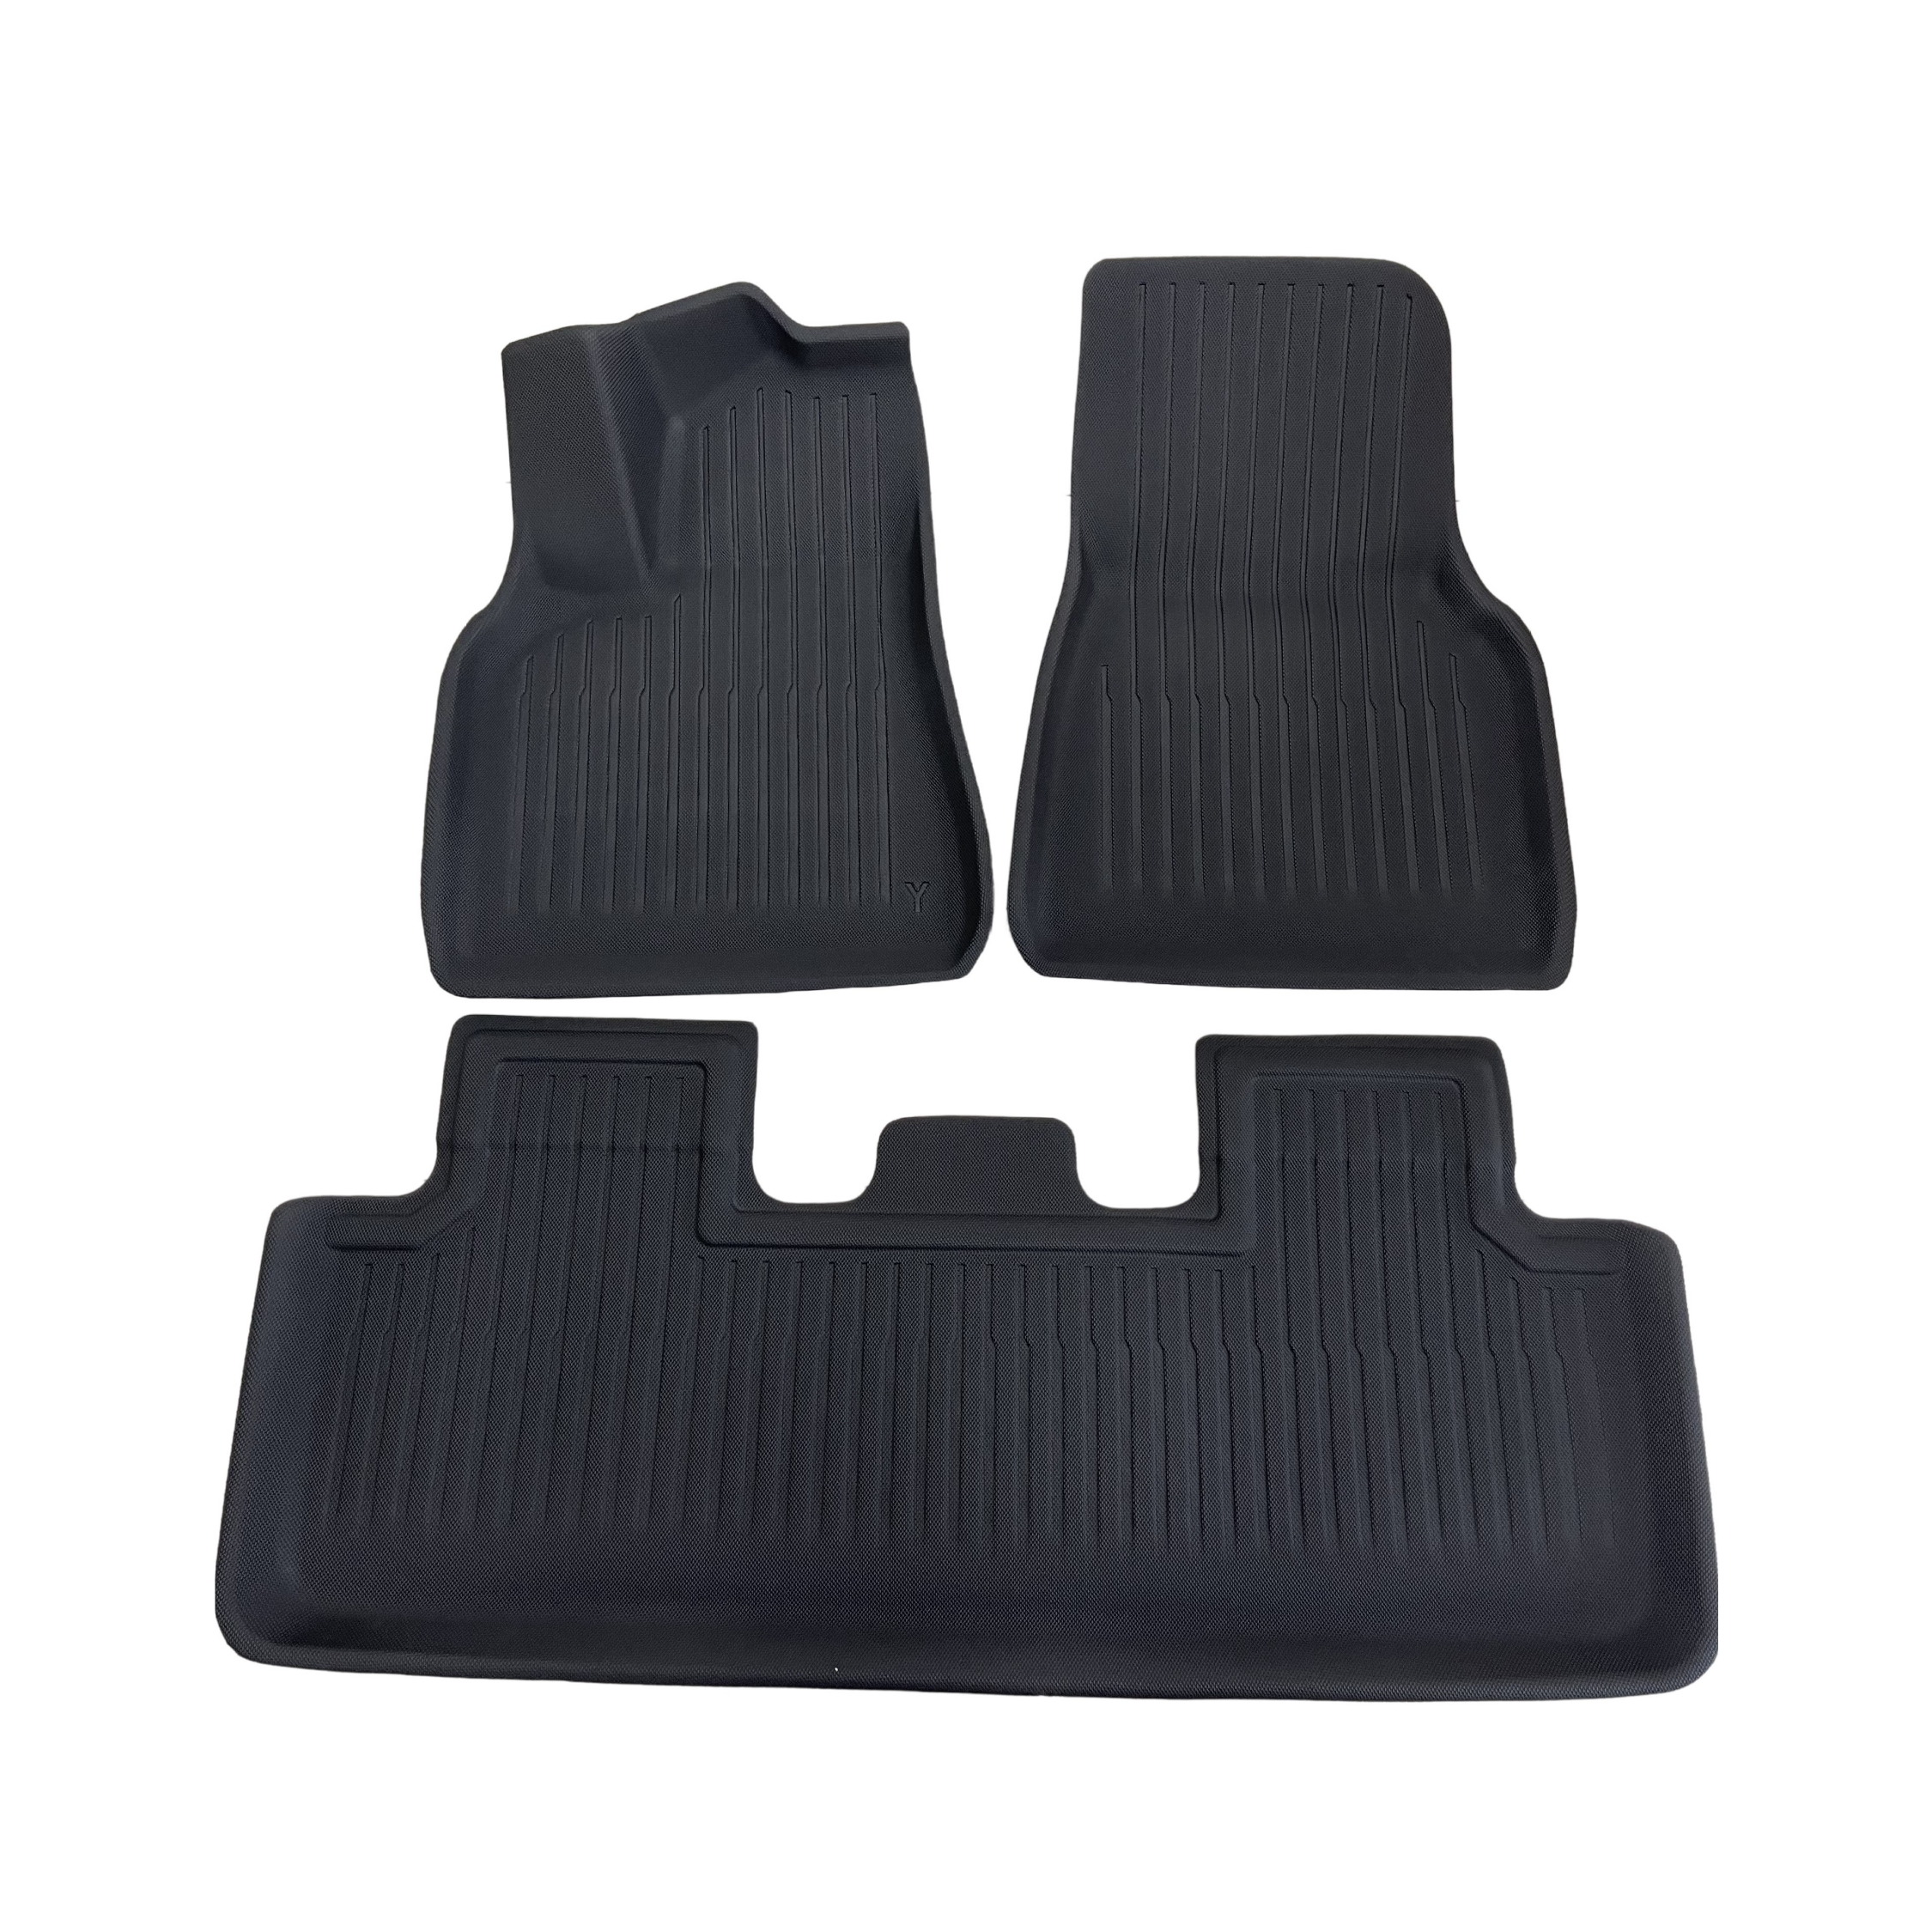 China Universal basics 3-Piece All-Weather Protection Heavy Duty Rubber  Floor Mats for Cars, SUVs, and Trucks 1884 Manufacturer and Supplier